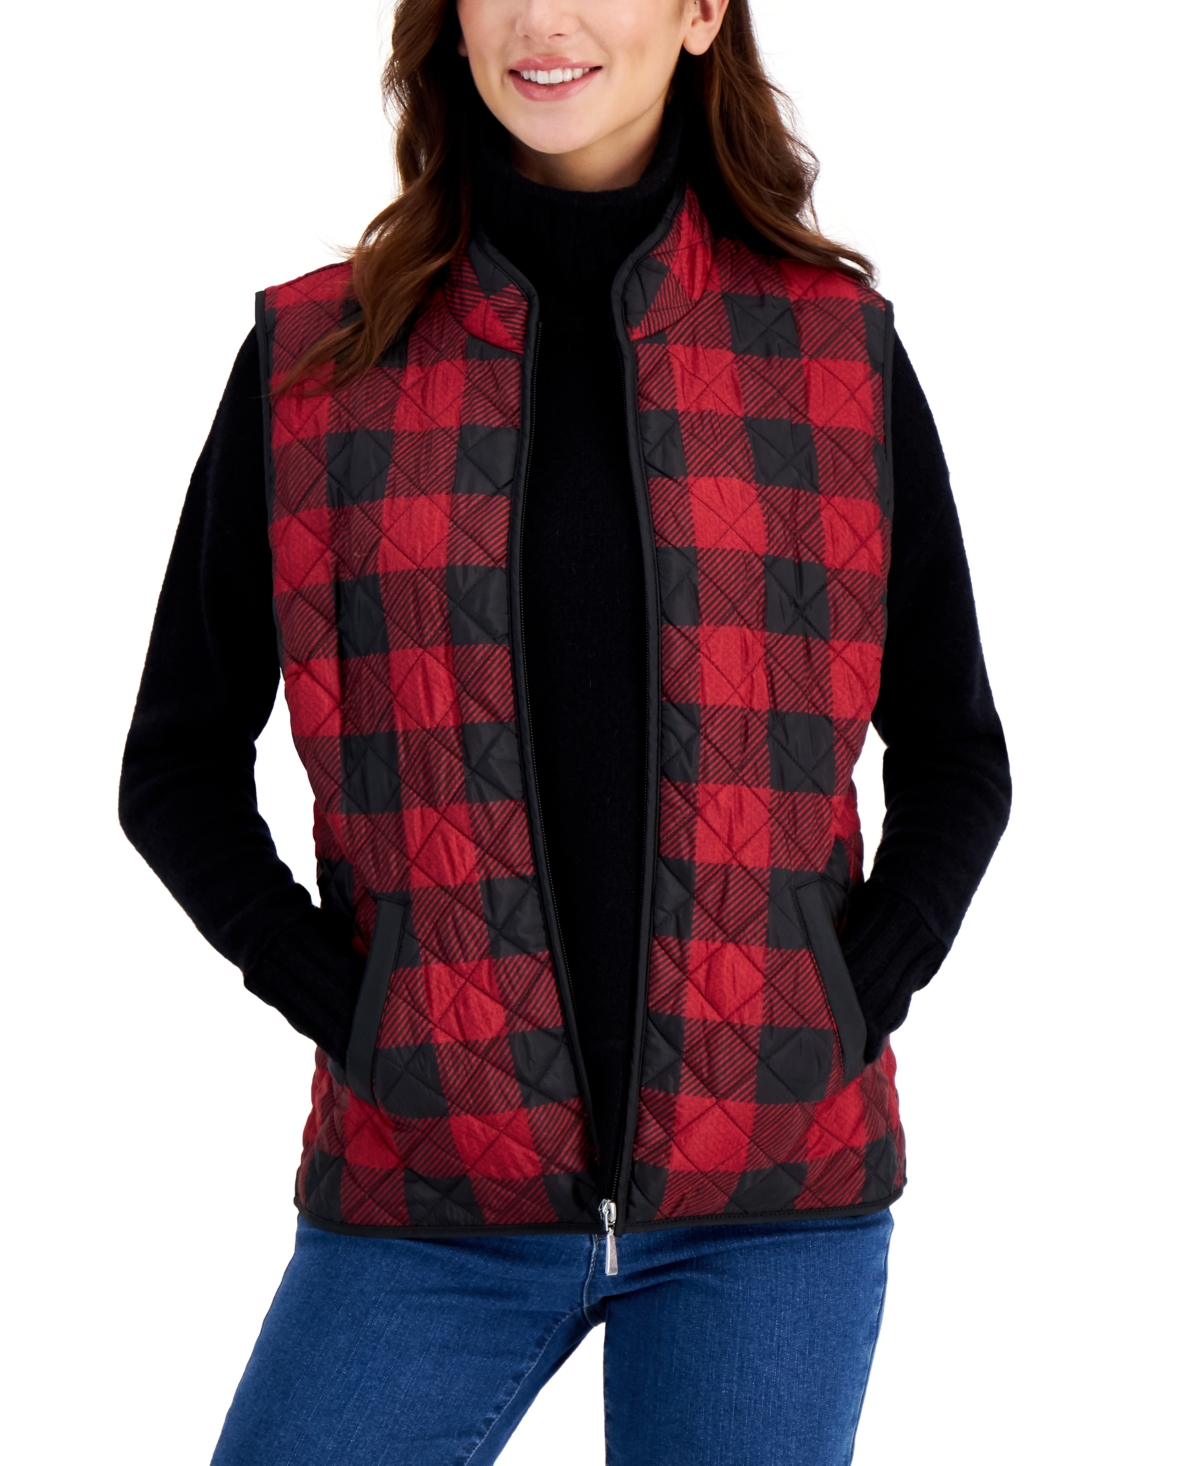 Buffalo-Check Puffer Vest, Created for Macy's - New Red Amore